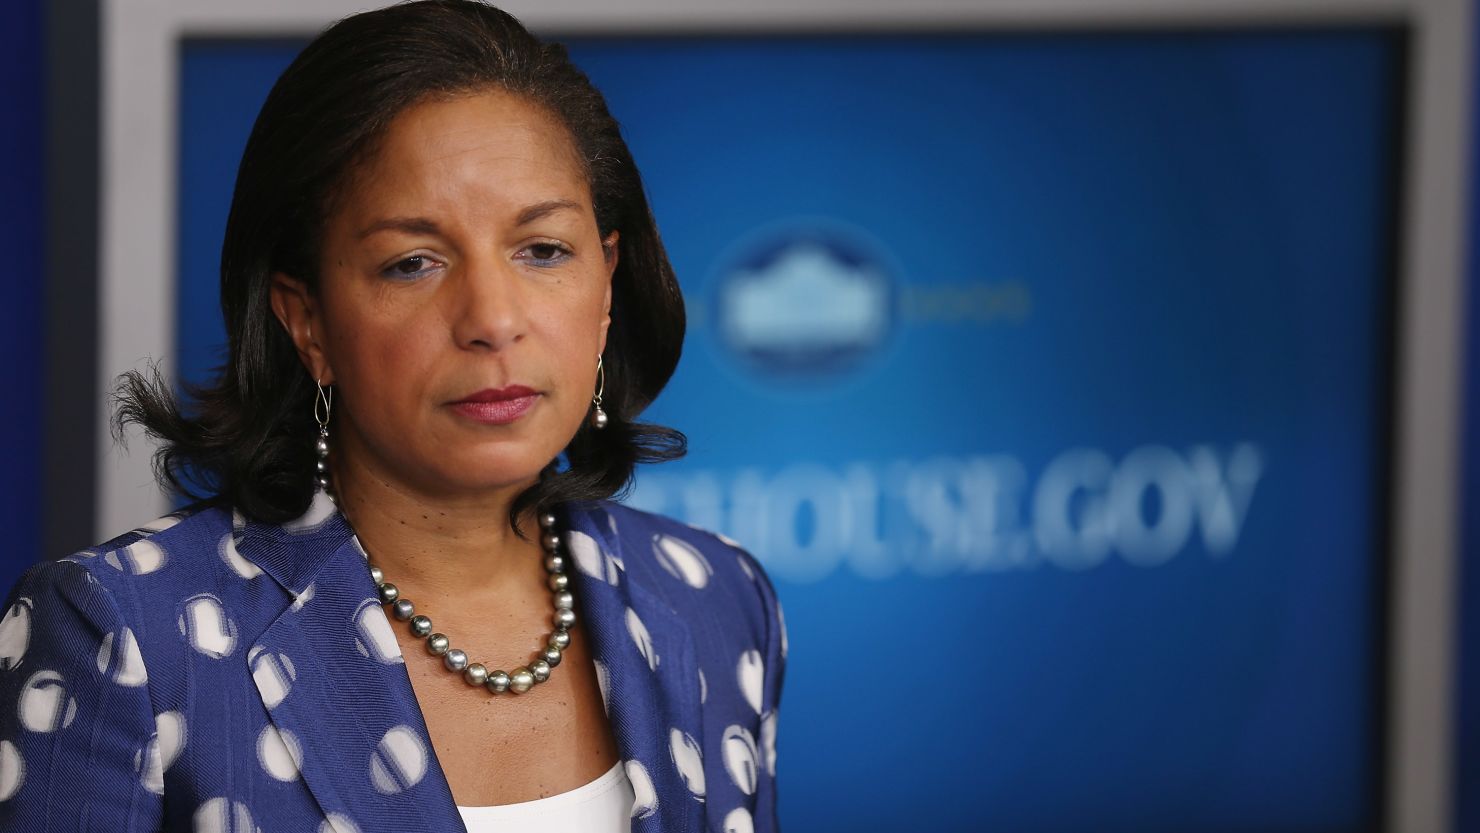 White House National Security Adviser Susan Rice at the White House July 22, 2015 in Washington. (Photo by Chip Somodevilla/Getty Images)